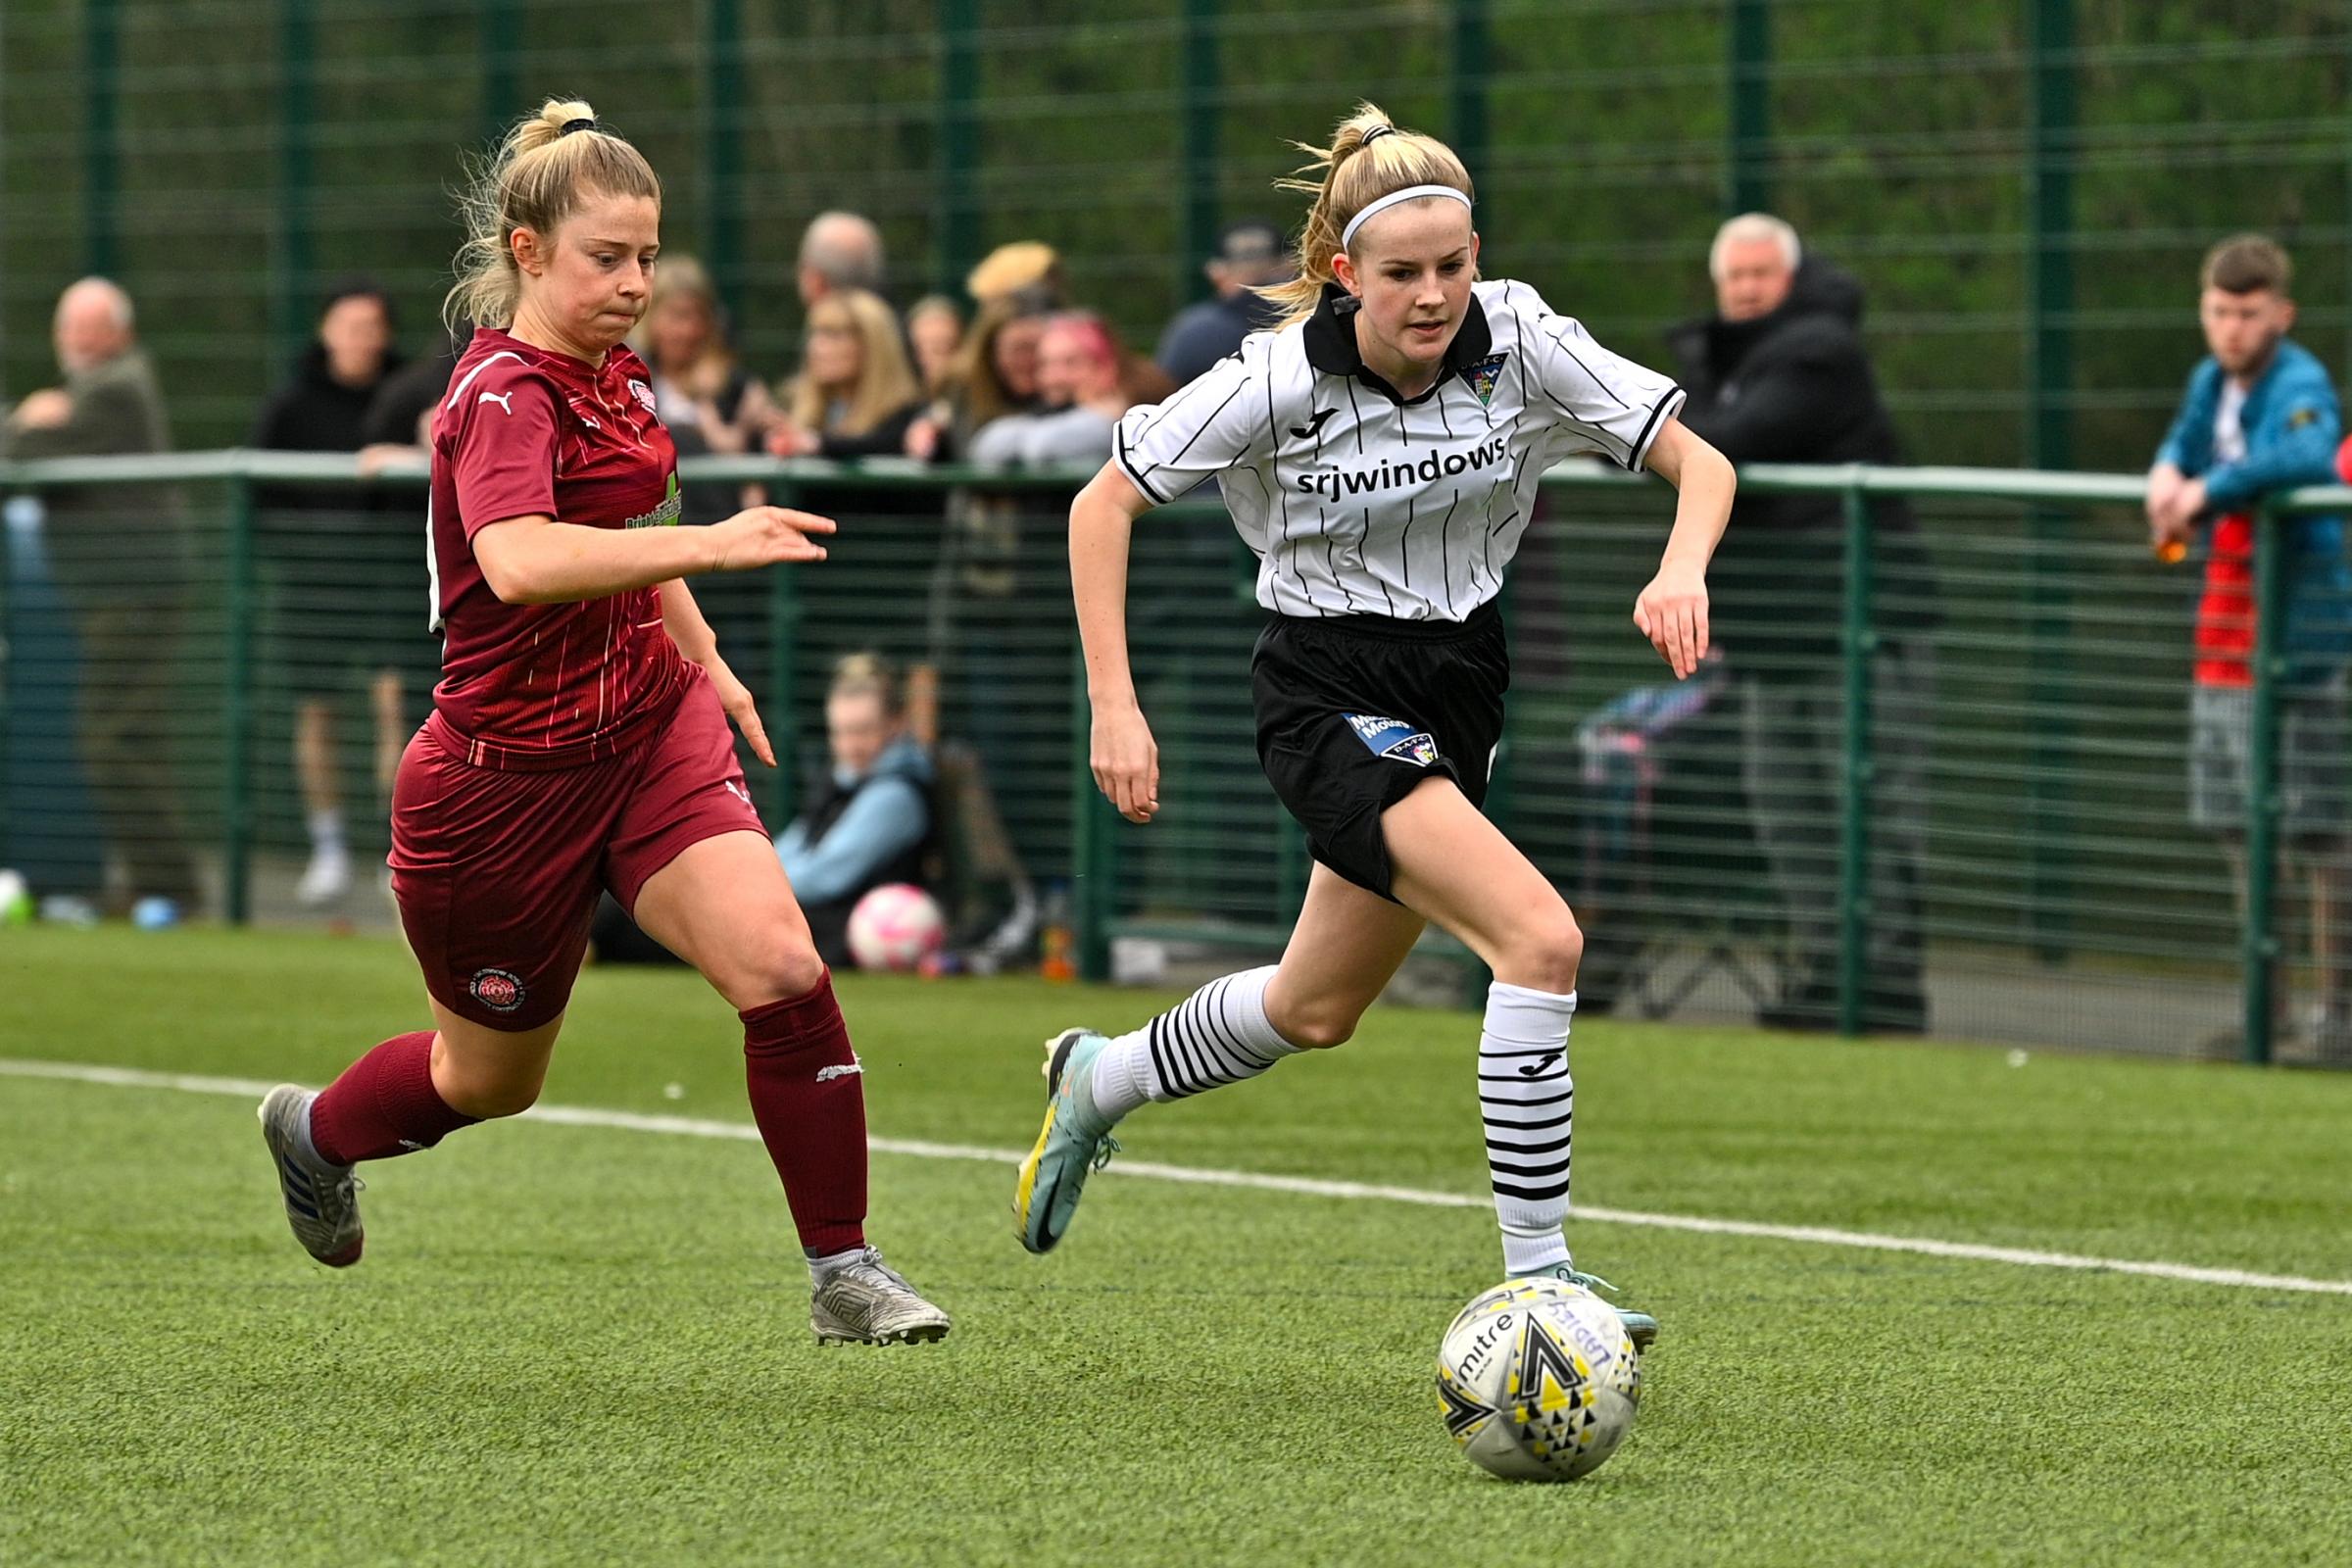 Dunfermline Athletic Ladies to play at East End Park